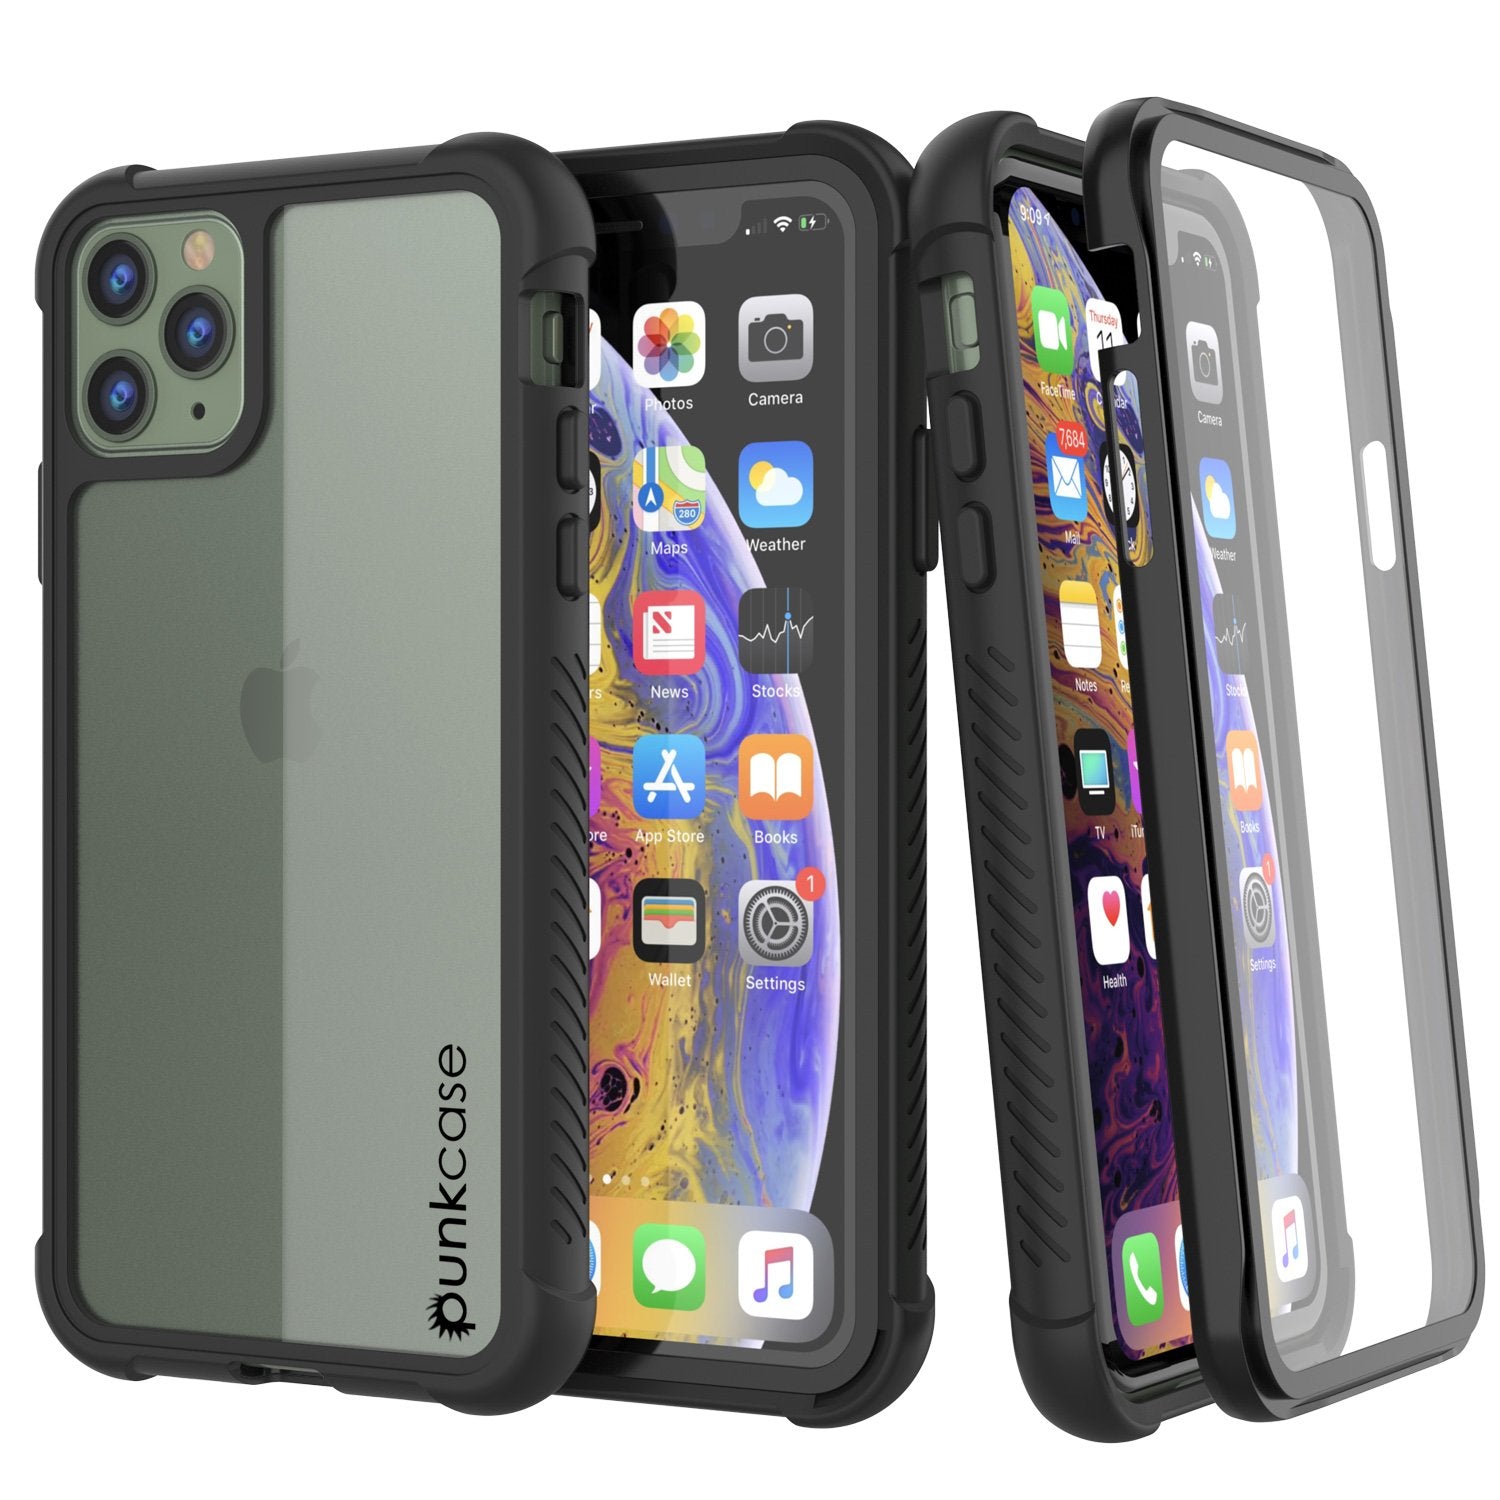 Punkcase iPhone 14 Pro Max Case, [Spartan 2.0 Series] Clear Rugged Heavy Duty Cover w/Built in Screen Protector [Black]